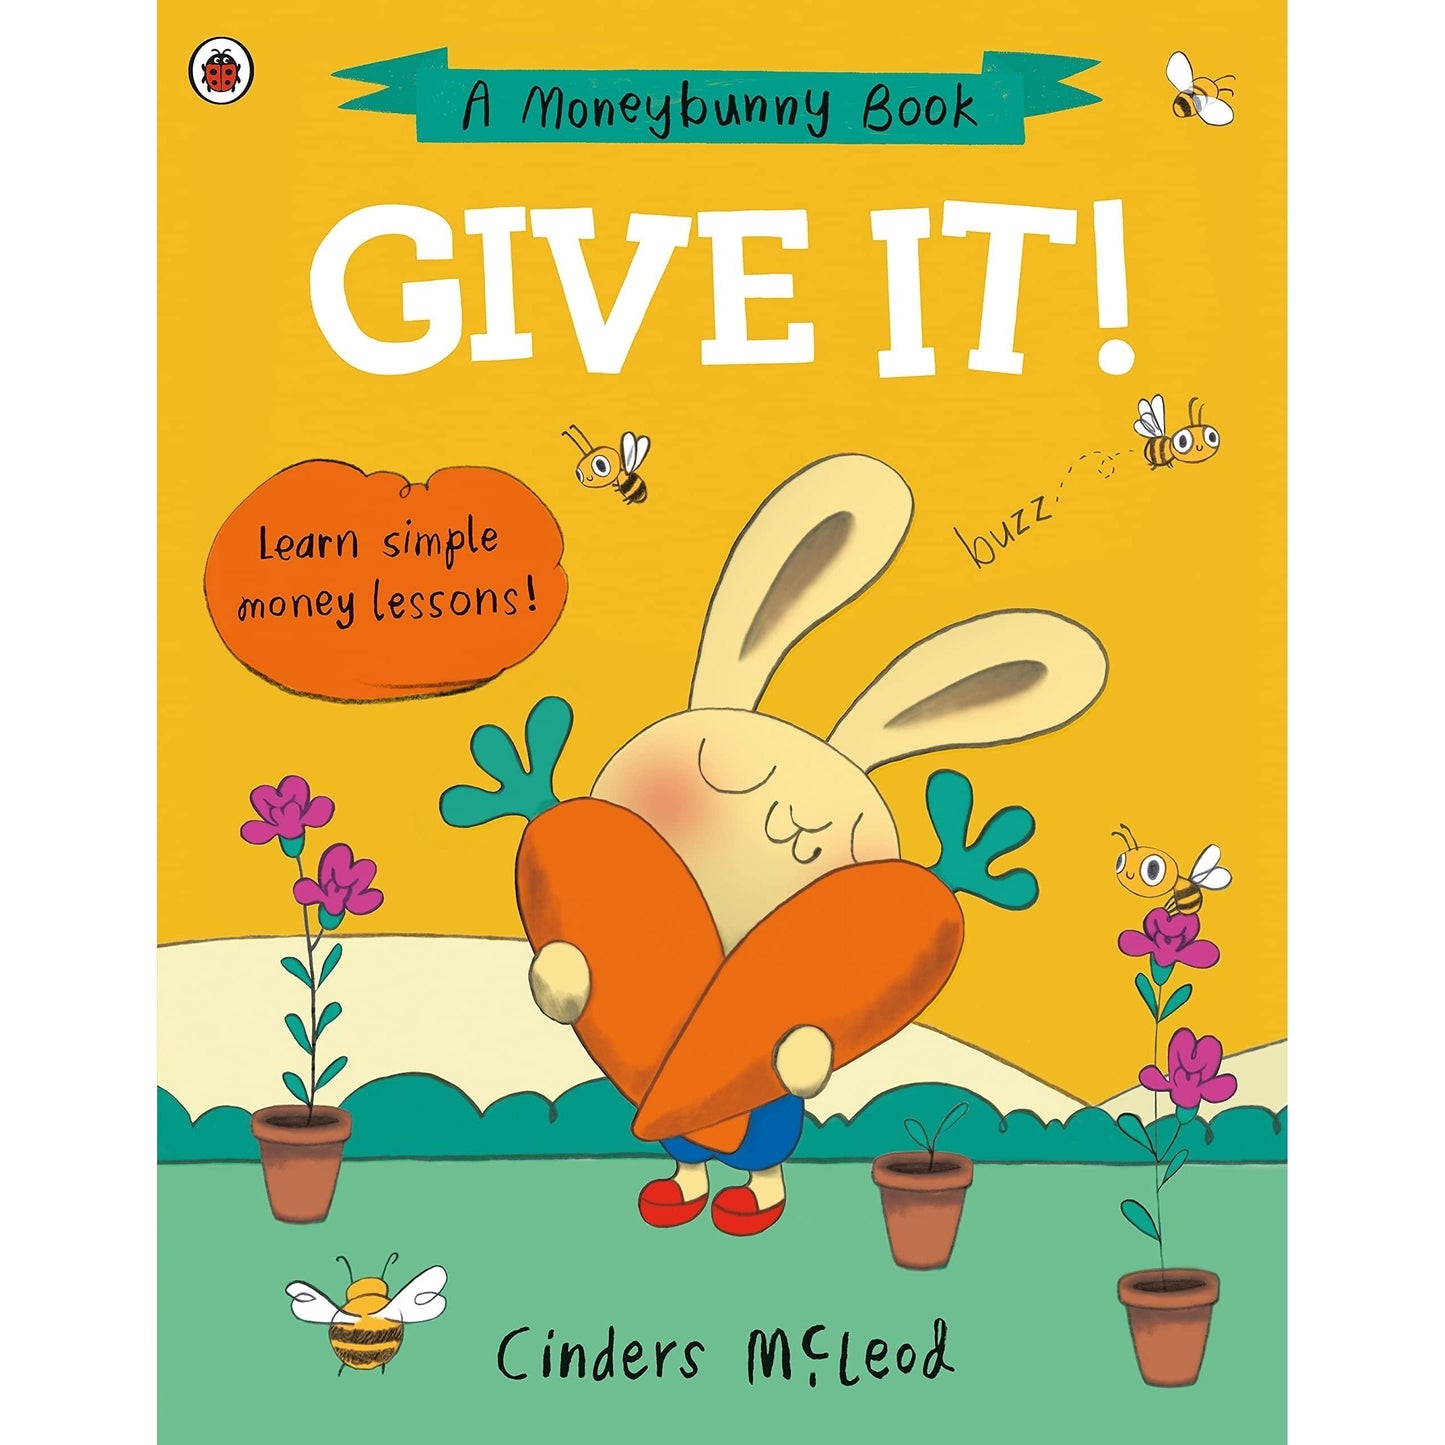 Give It!: Learn simple money lessons